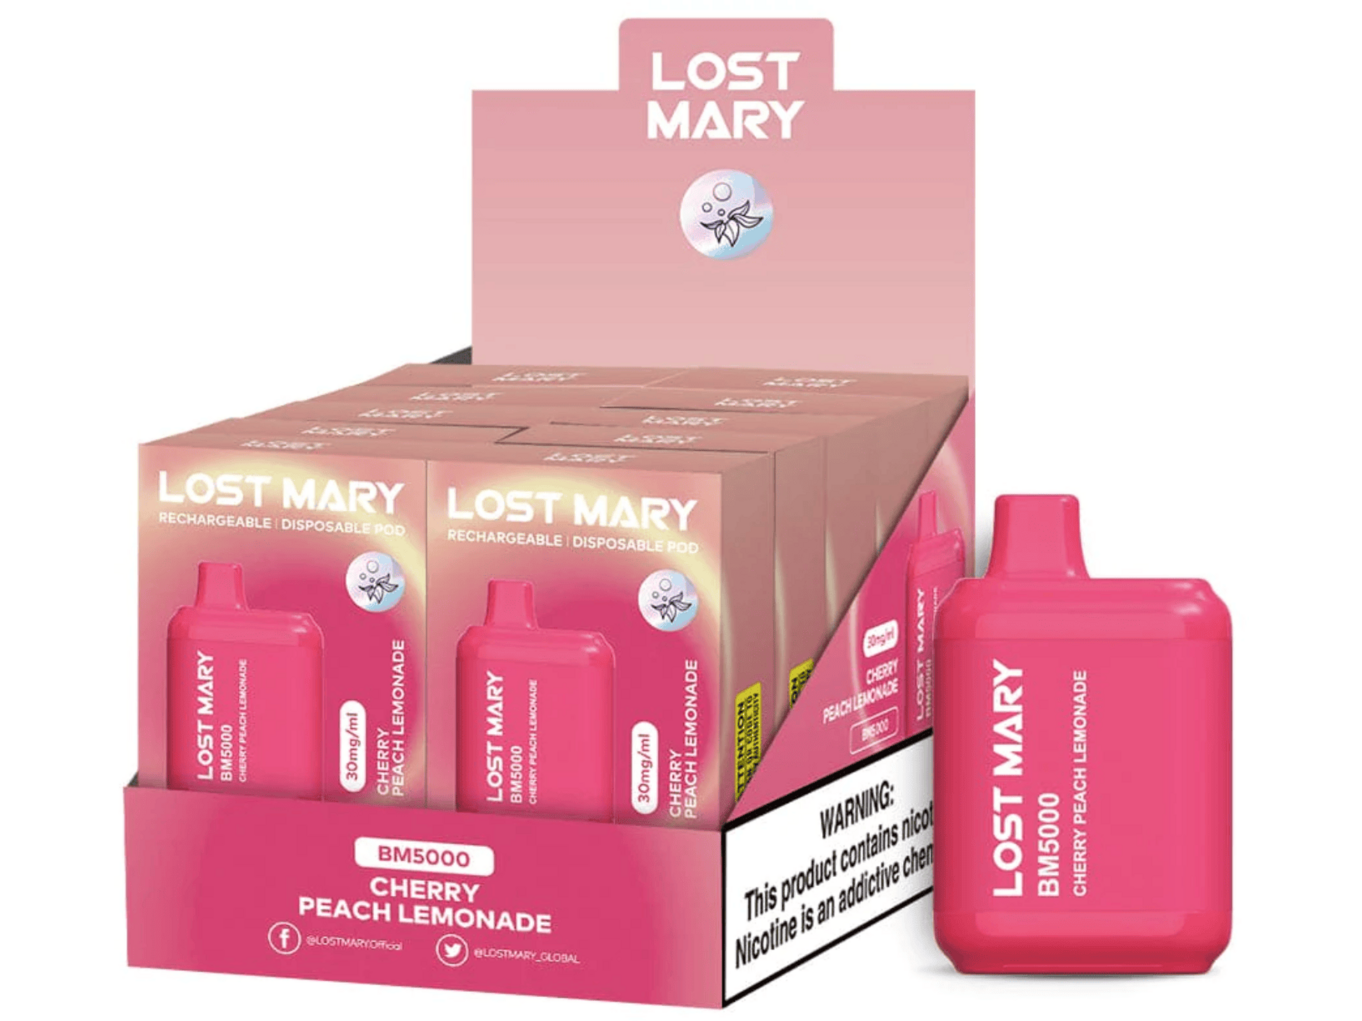 Lost Mary BM5000 Cherry Peach Lemonade flavored disposable vape device and box.